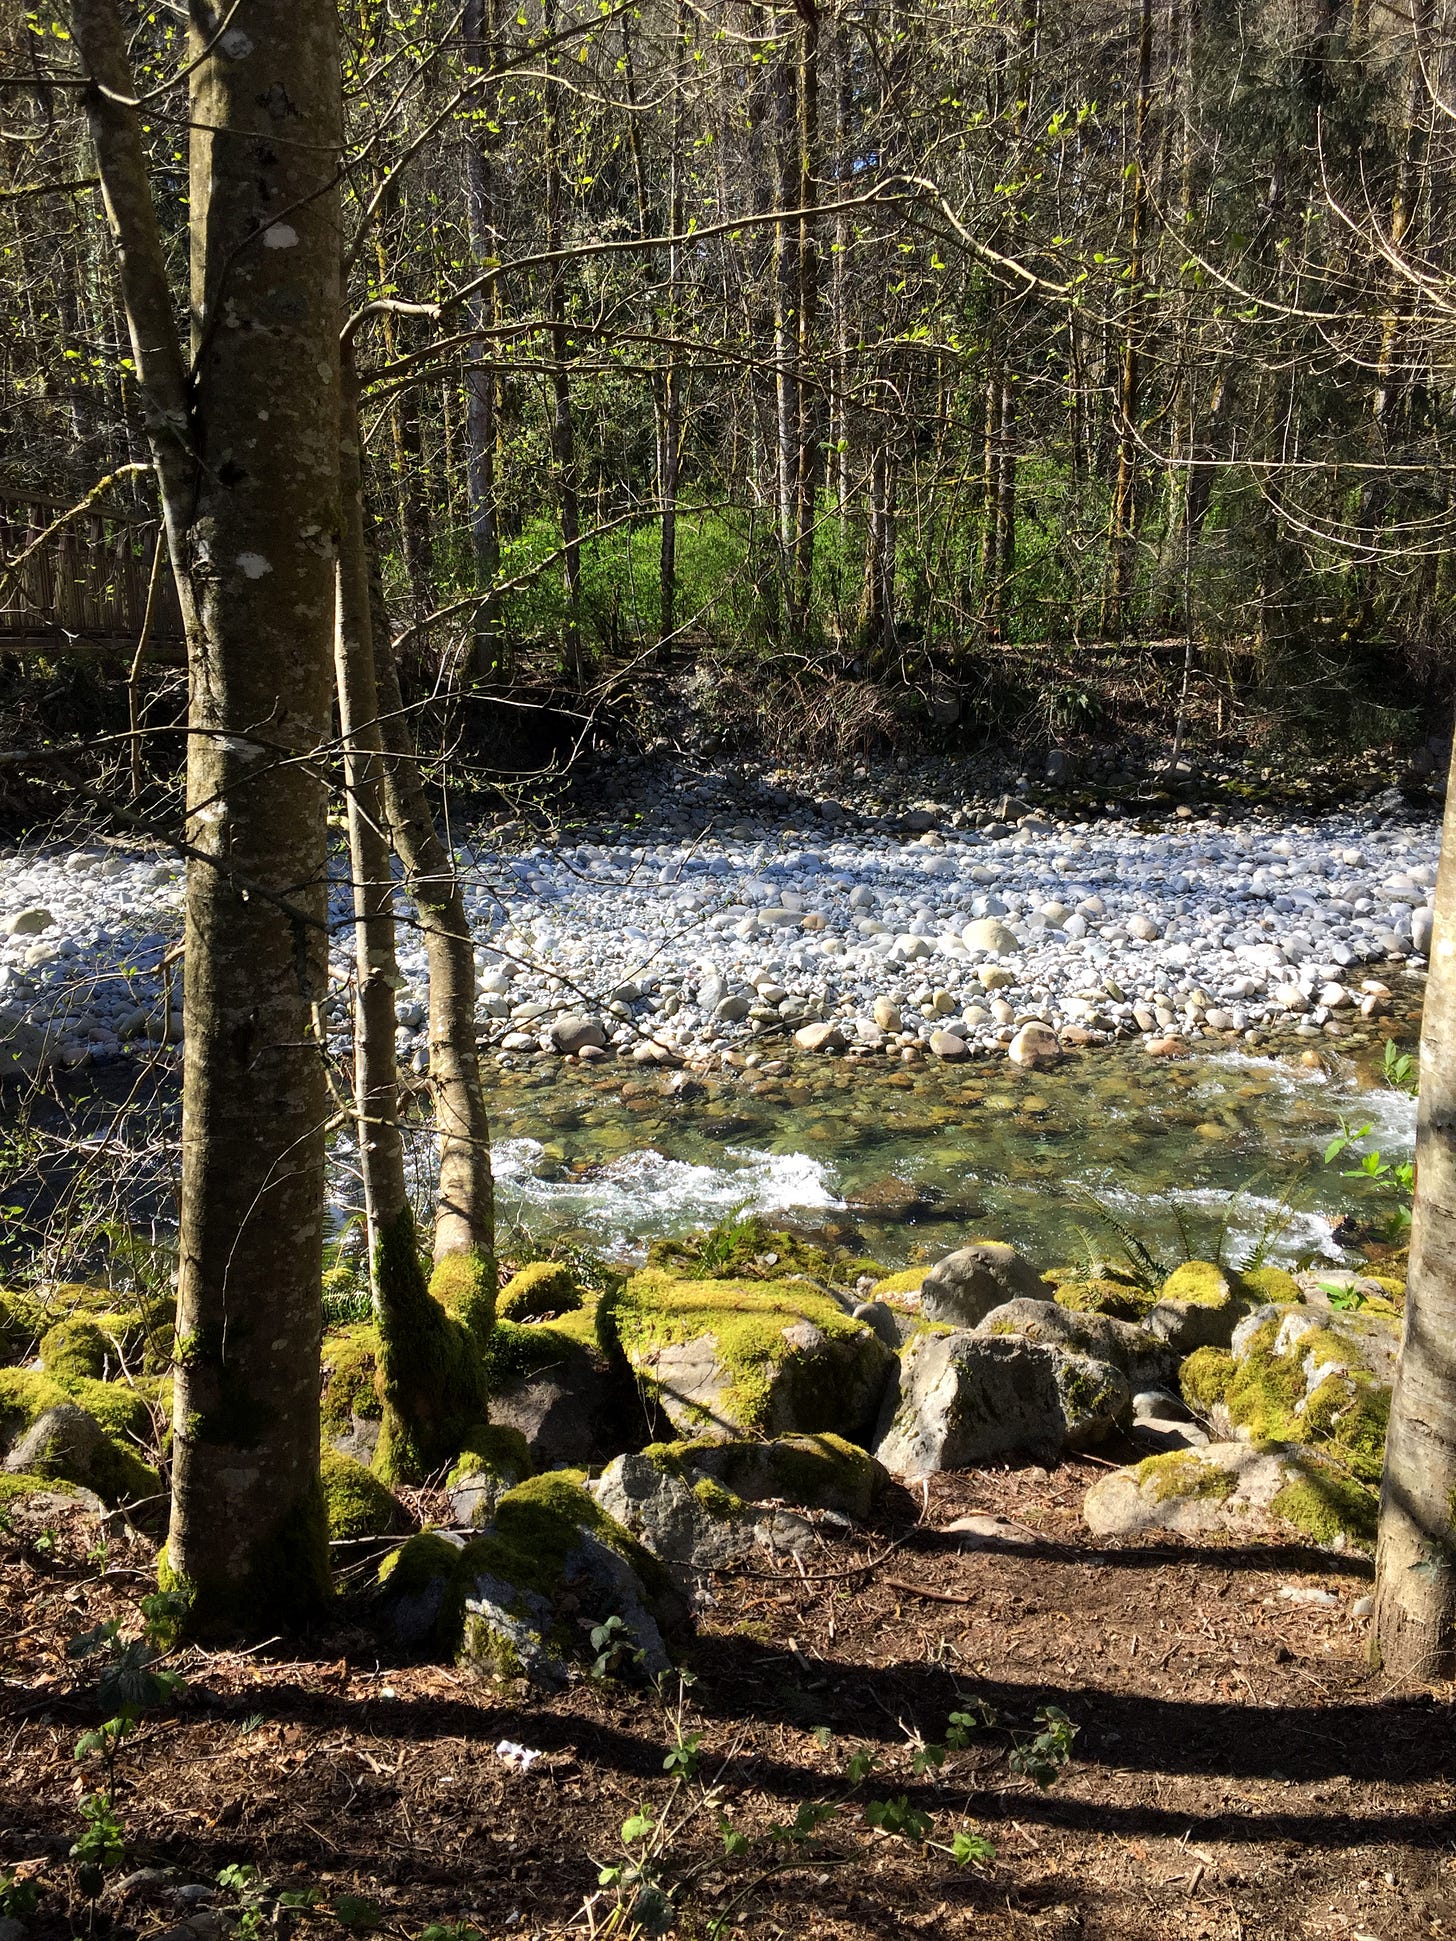 A rushing green creek, with skinny trees and a rocky shore on the far side, and large moss-covered rocks at the edge of a forest path on the near side.